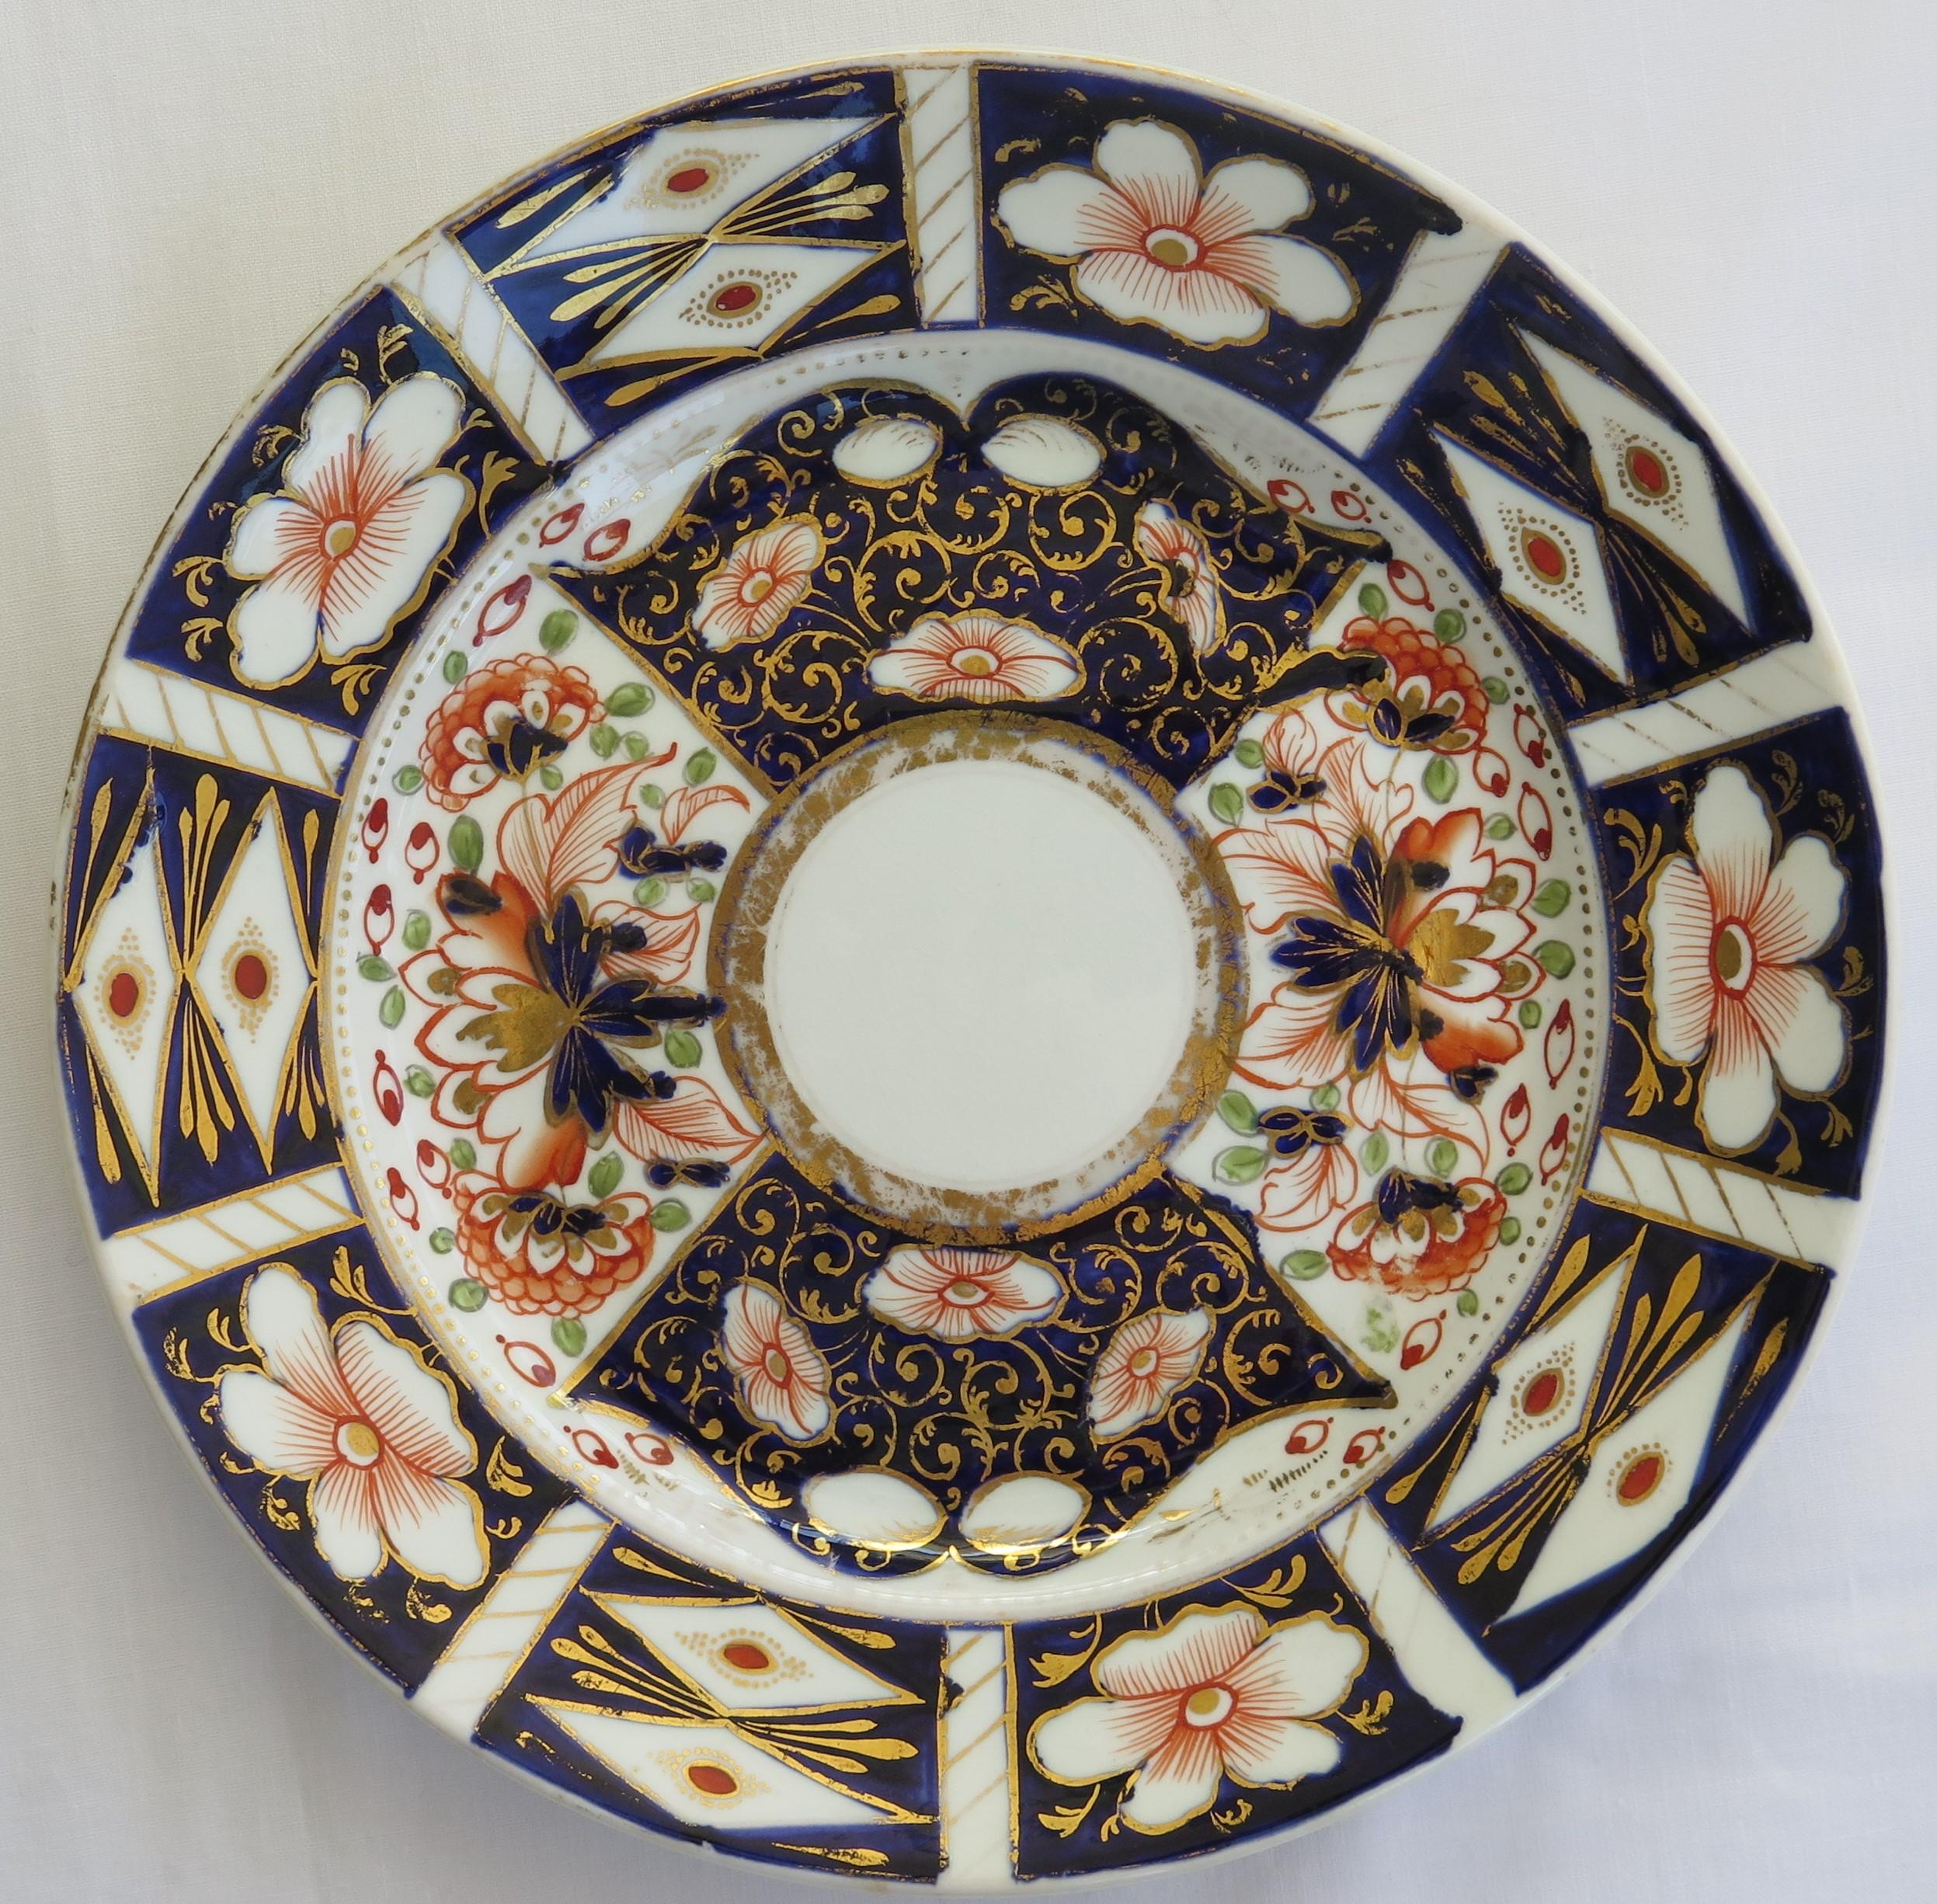 SIX Davenport Porcelain Plates Hand Painted and Gilded Pattern, Circa 1870 For Sale 2